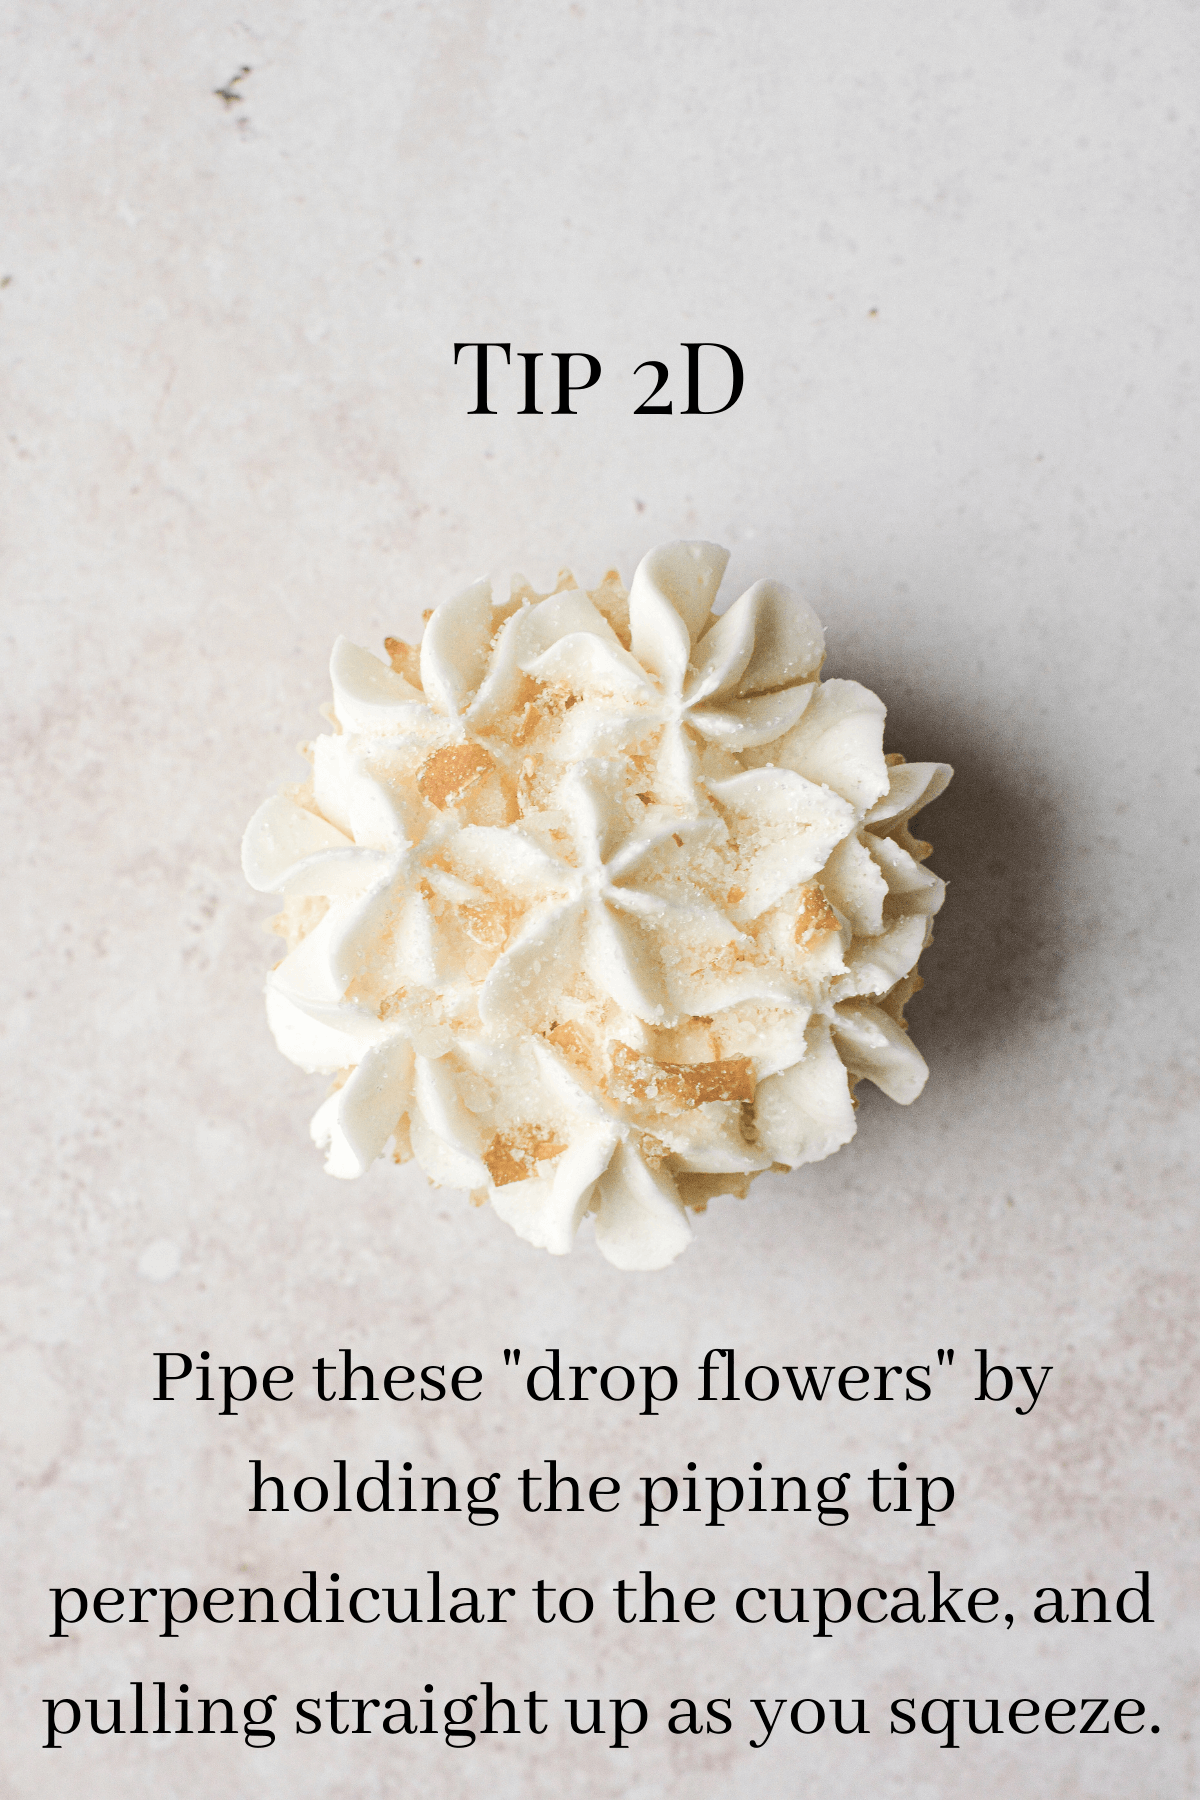 A graphic showing how to use tip 2D to pipe buttercream onto a lemon cupcake.